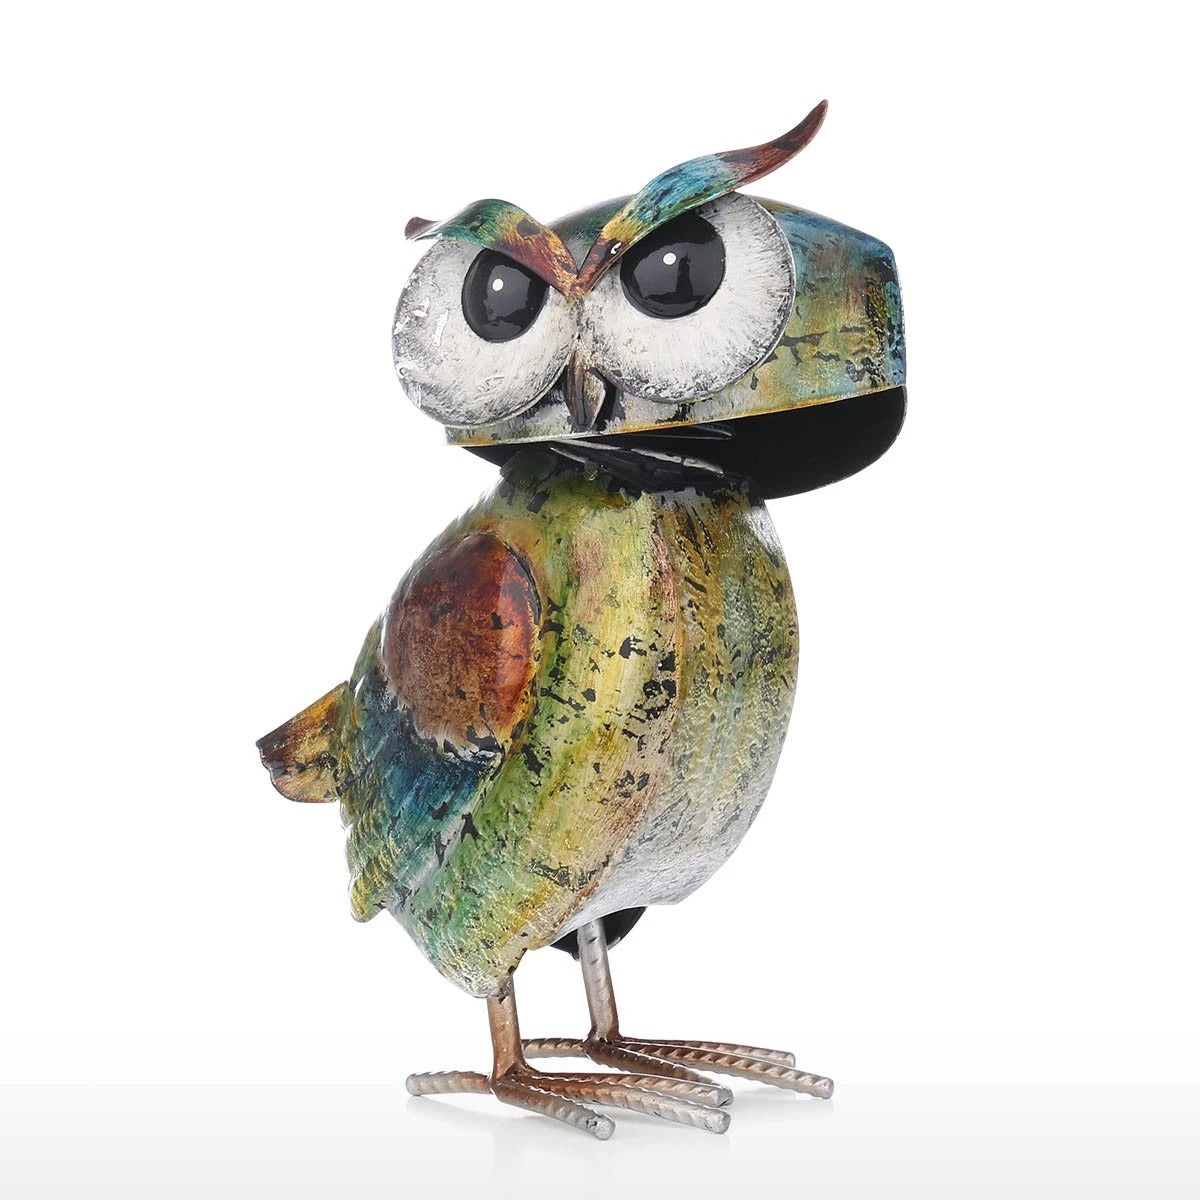 Colorful Metal Owl Sculpture to Decor and Ornaments or Owl Gifts